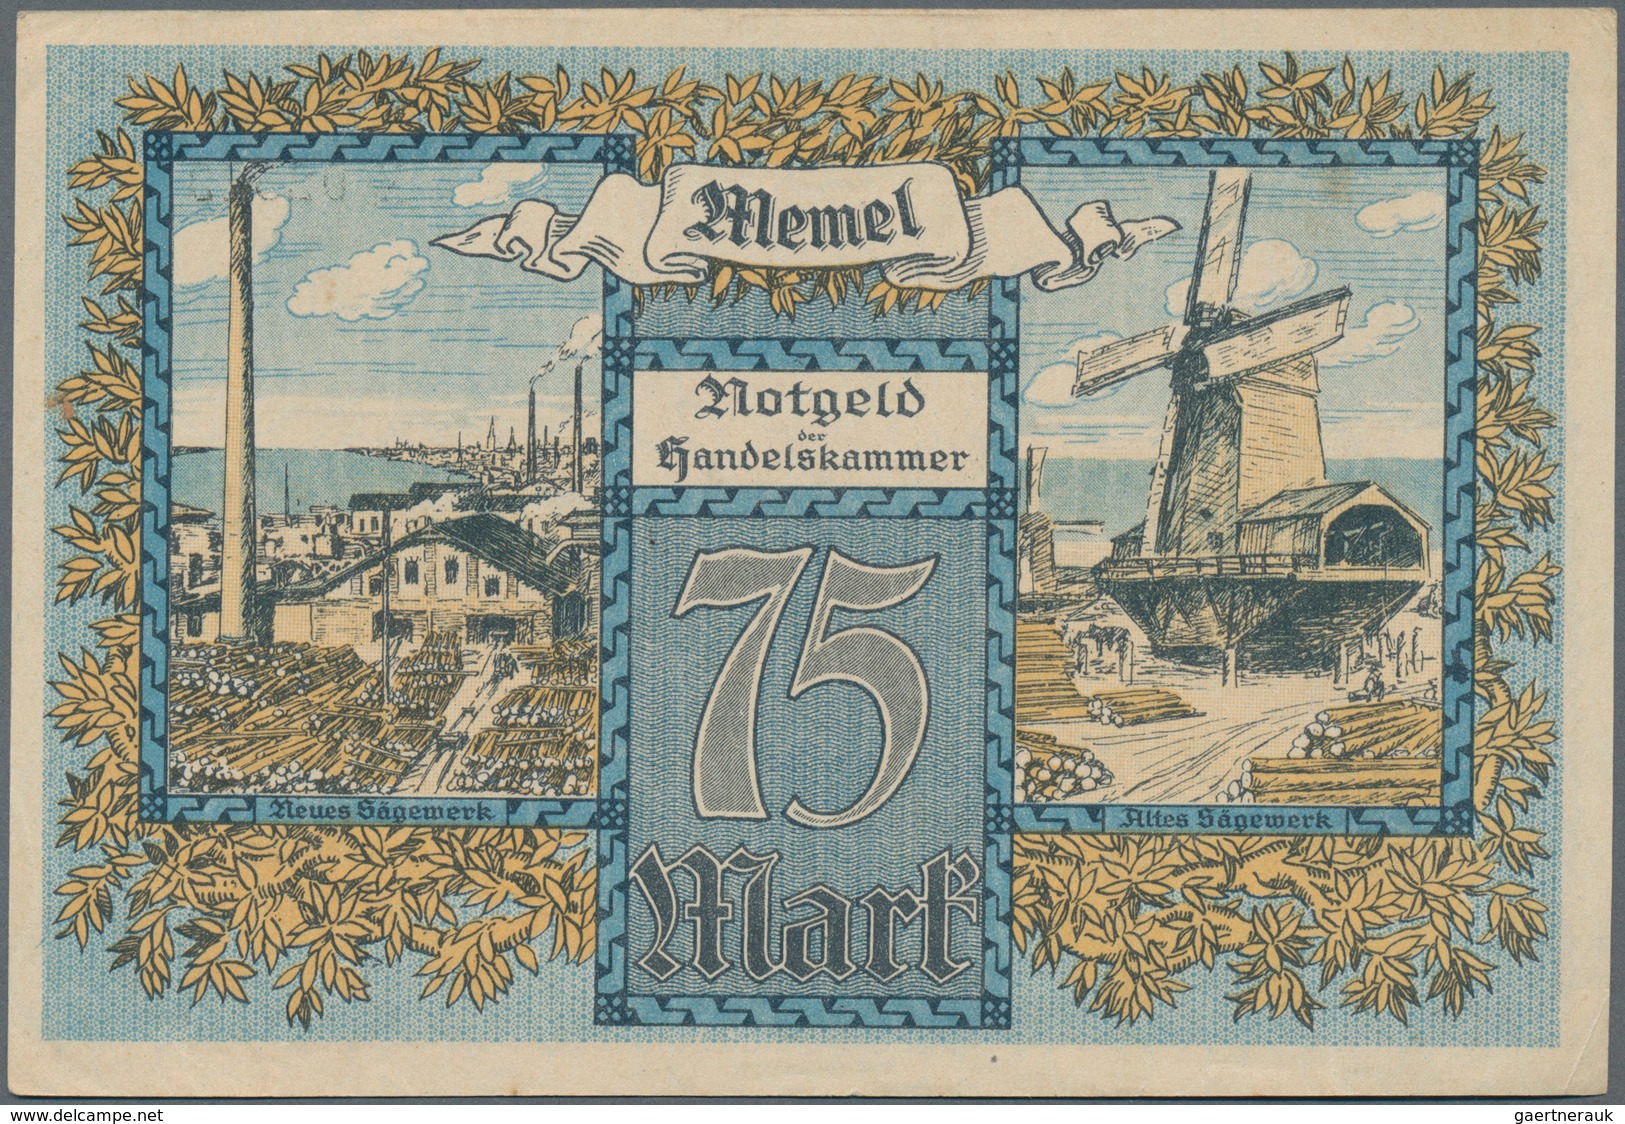 Alle Welt: Album with 112 banknotes from different countries and Notgeld for example Austria Wiener